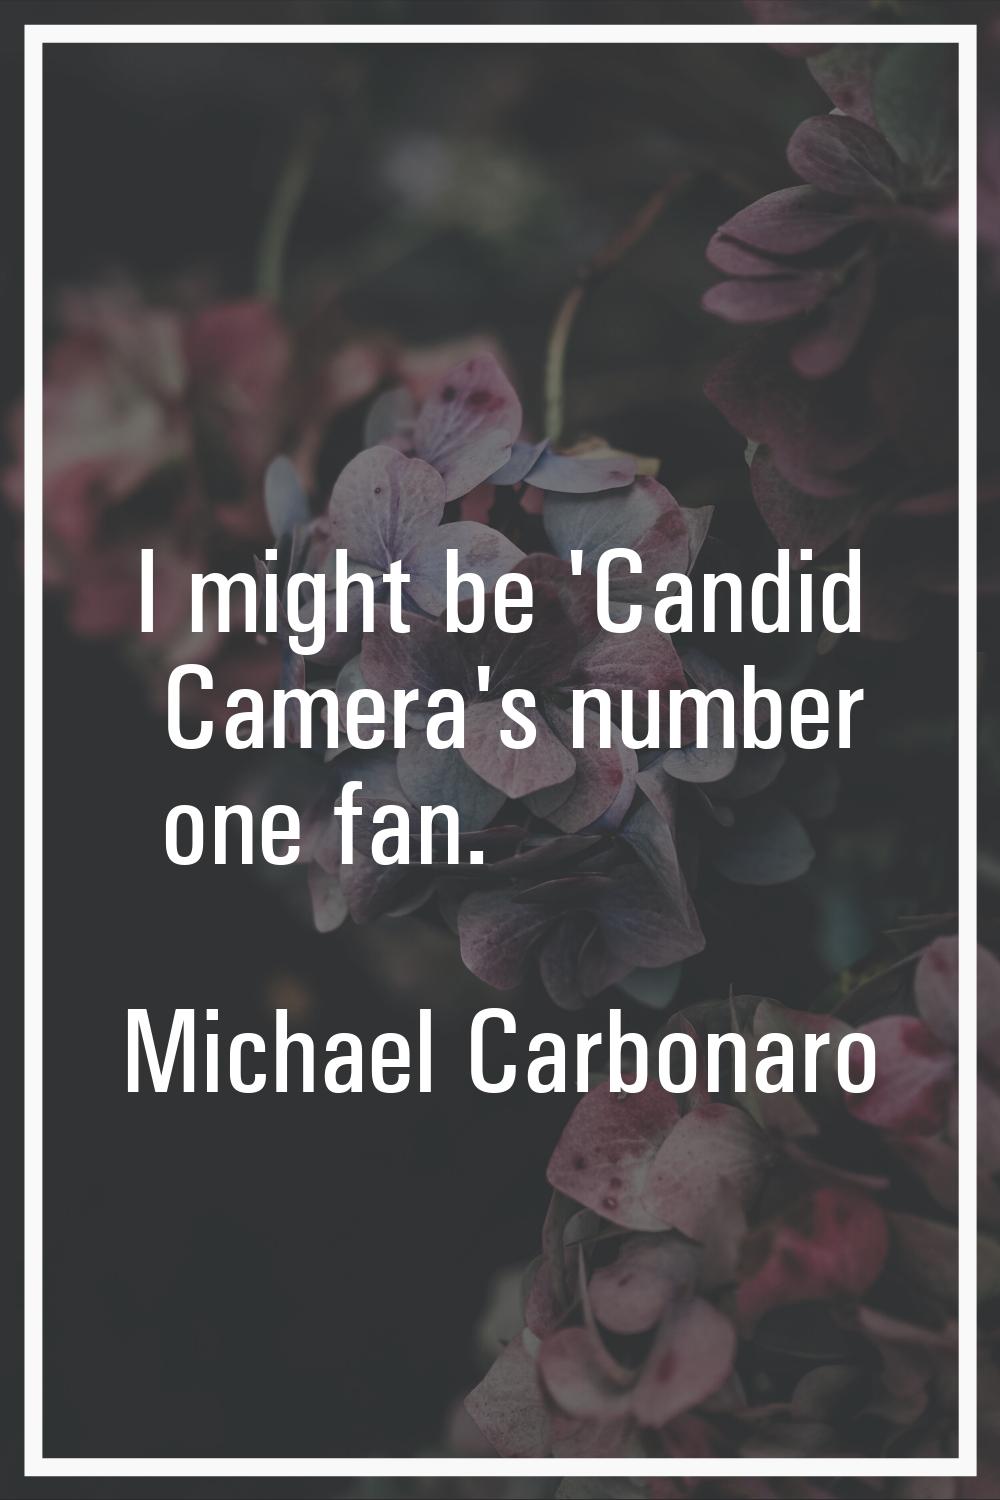 I might be 'Candid Camera's number one fan.